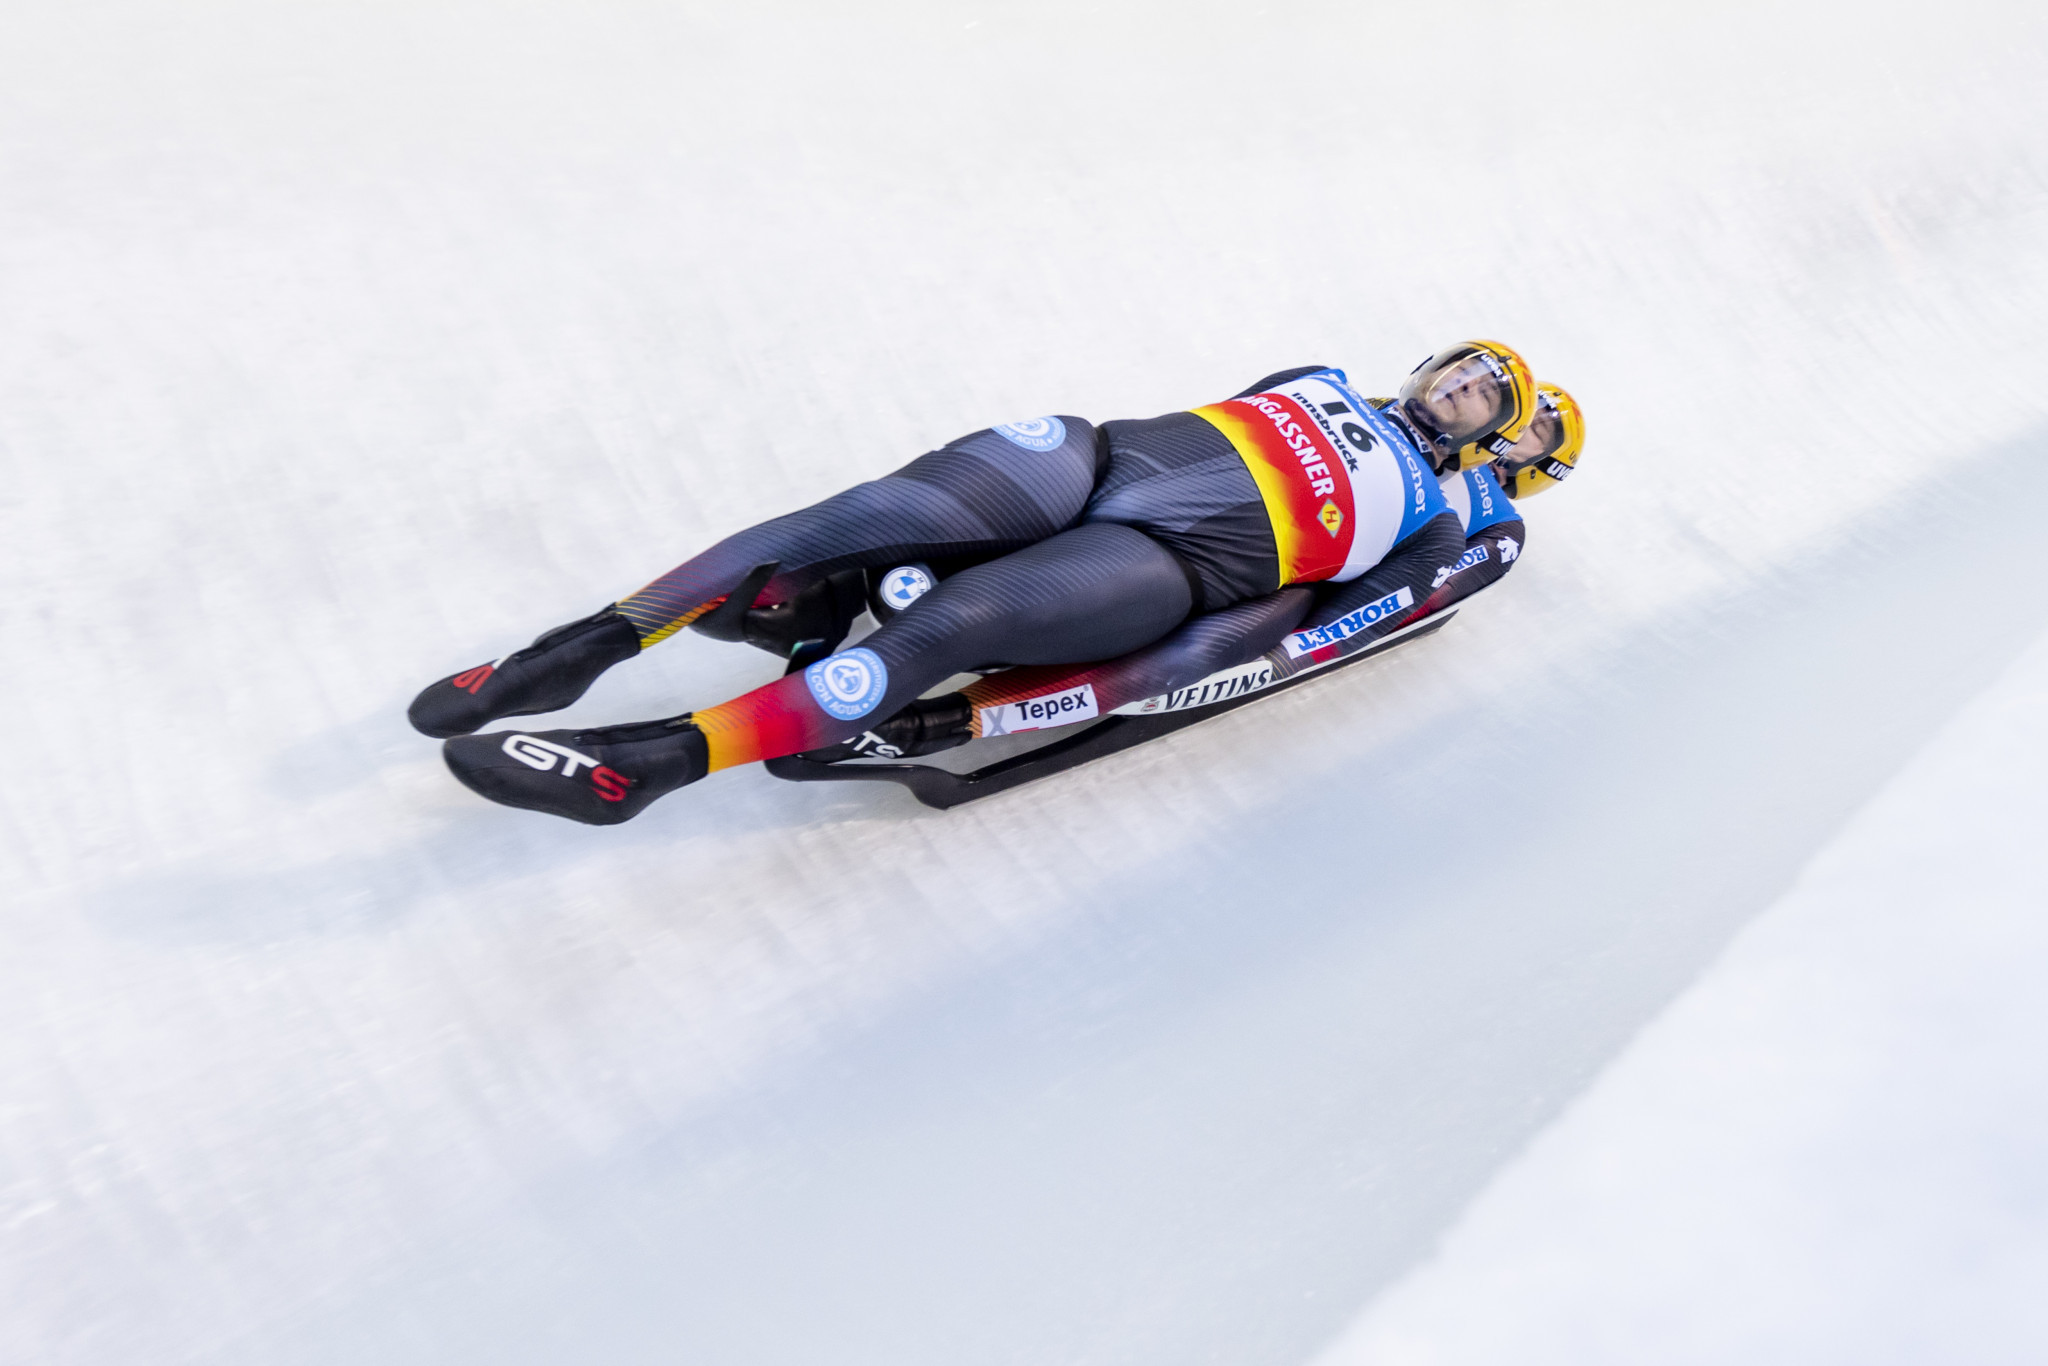 Second Winterberg leg added to Luge World Cup schedule